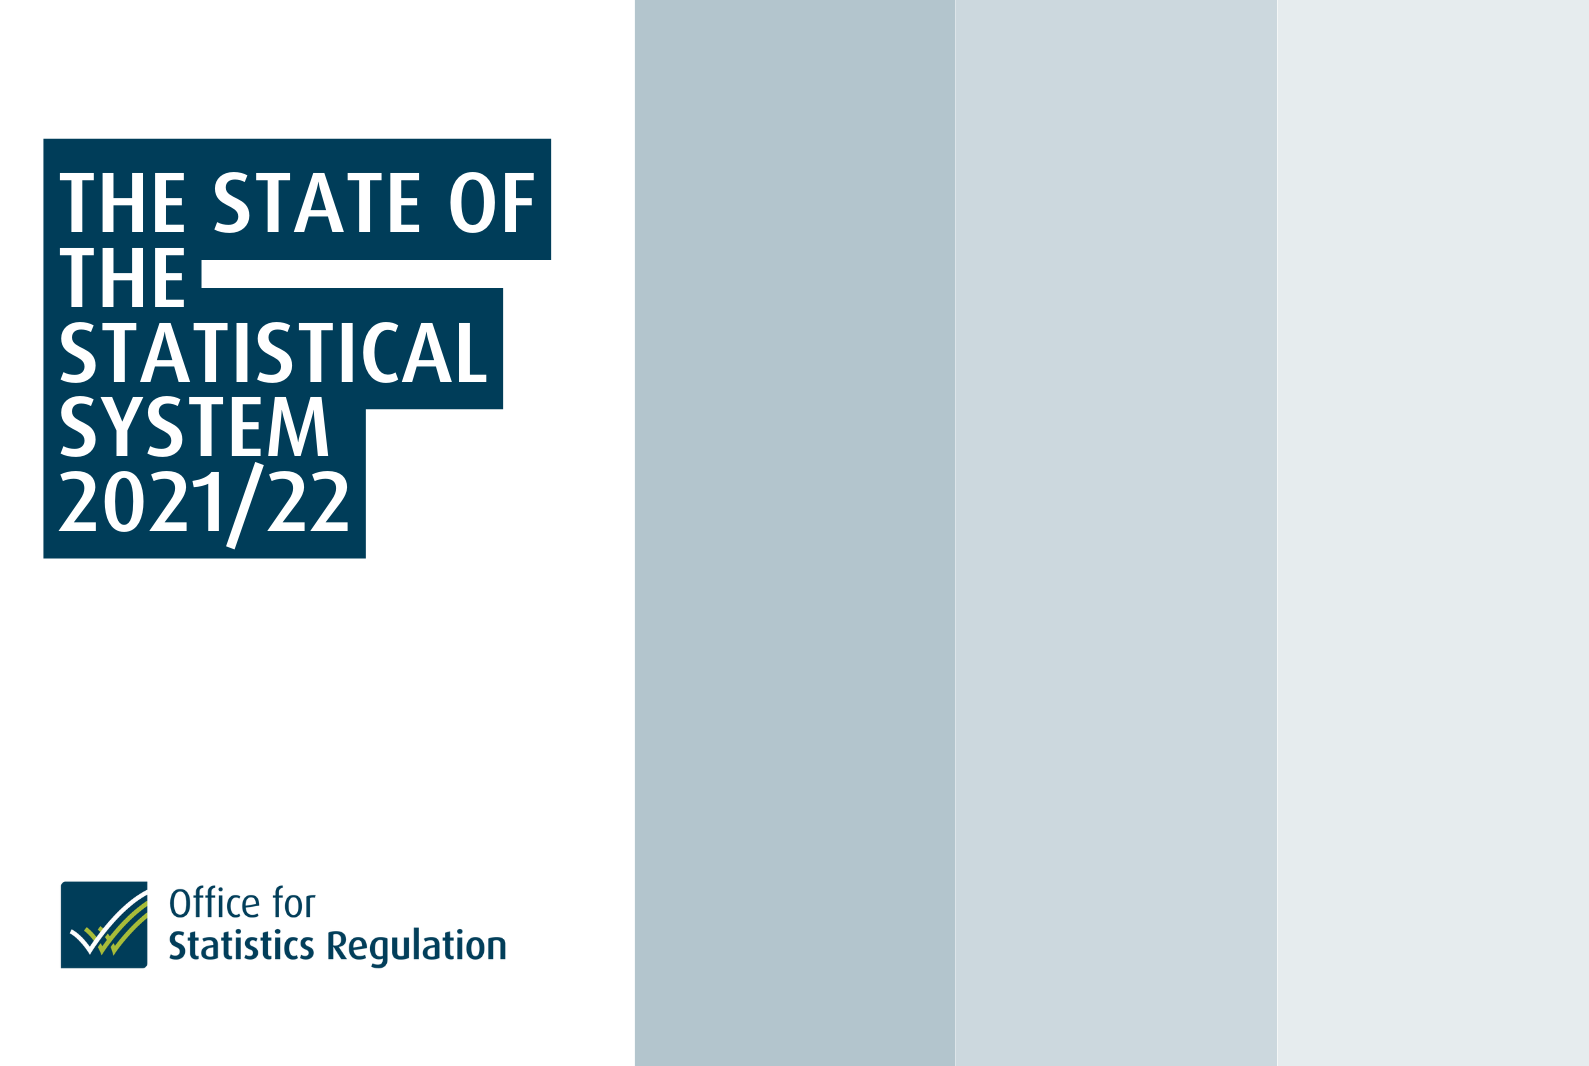 The state of the statistical system 2021/22